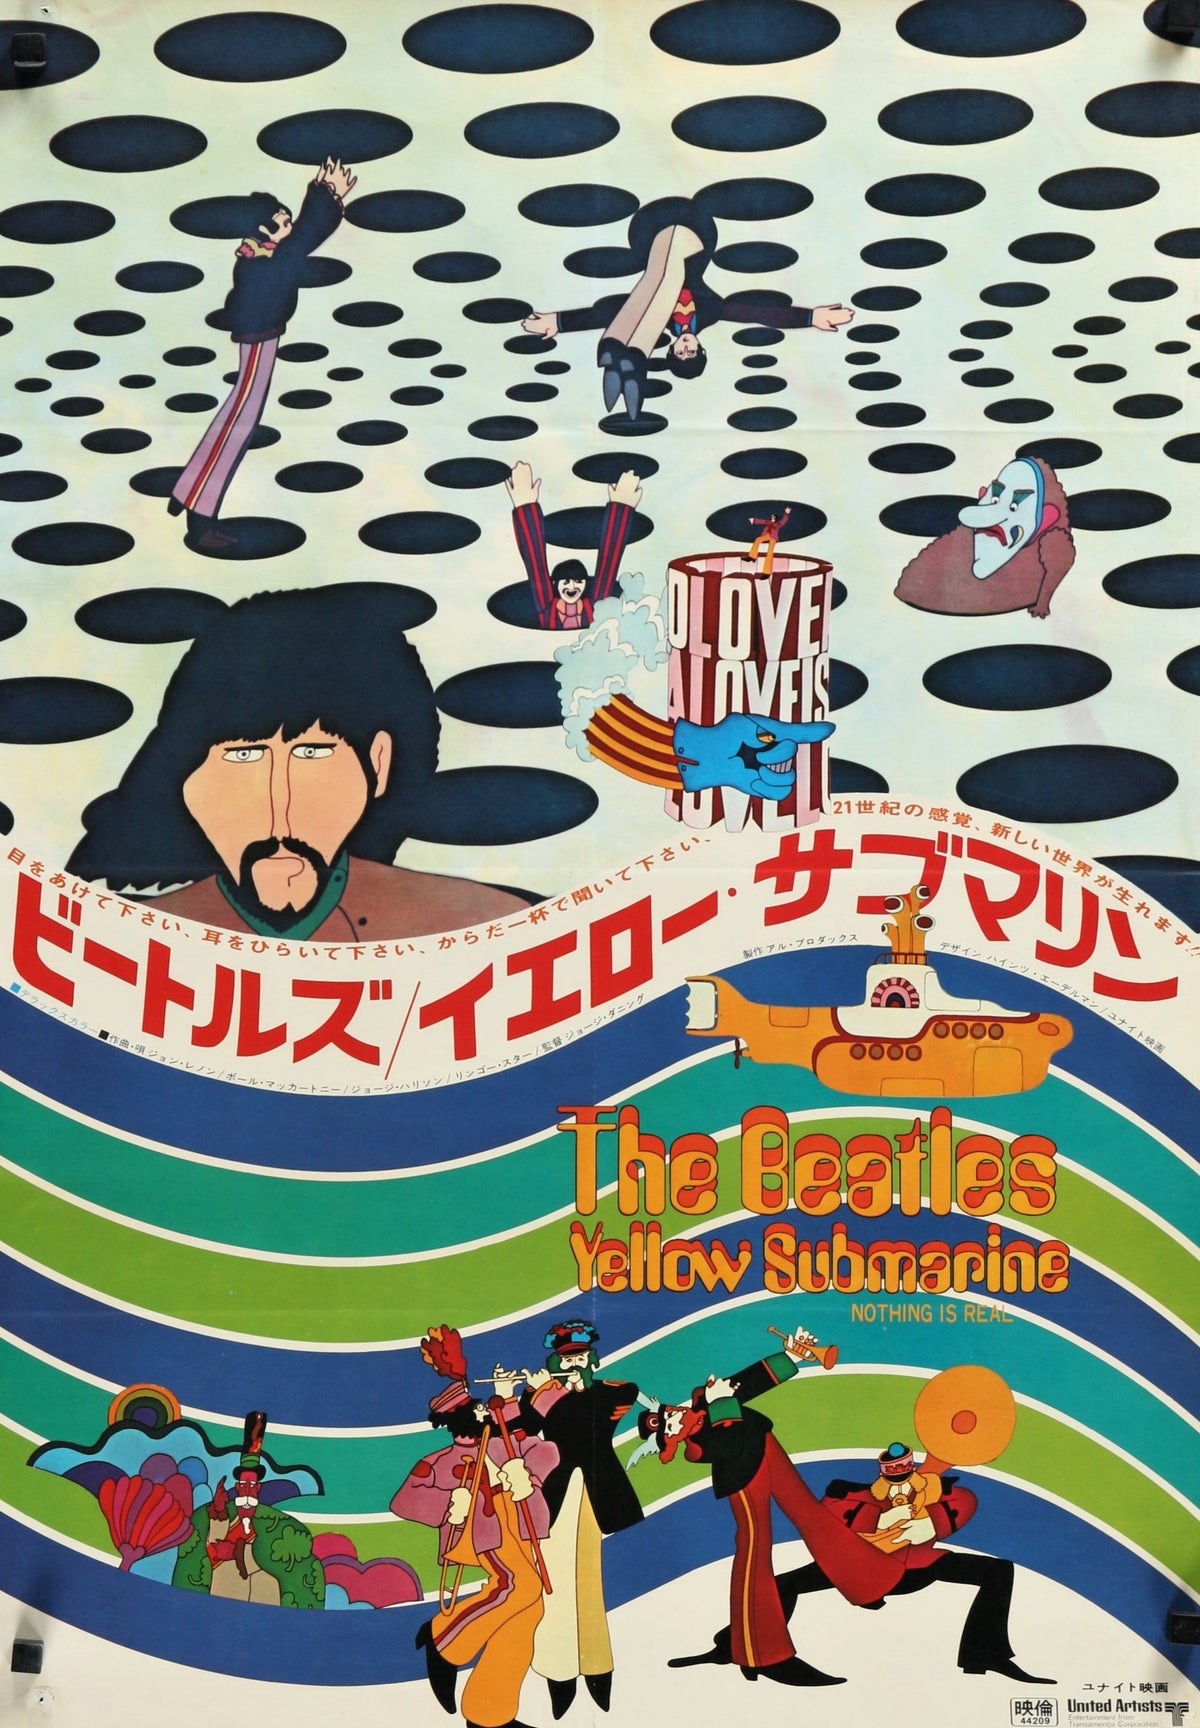 Yellow Submarine- Japanese Release - Authentic Vintage Poster